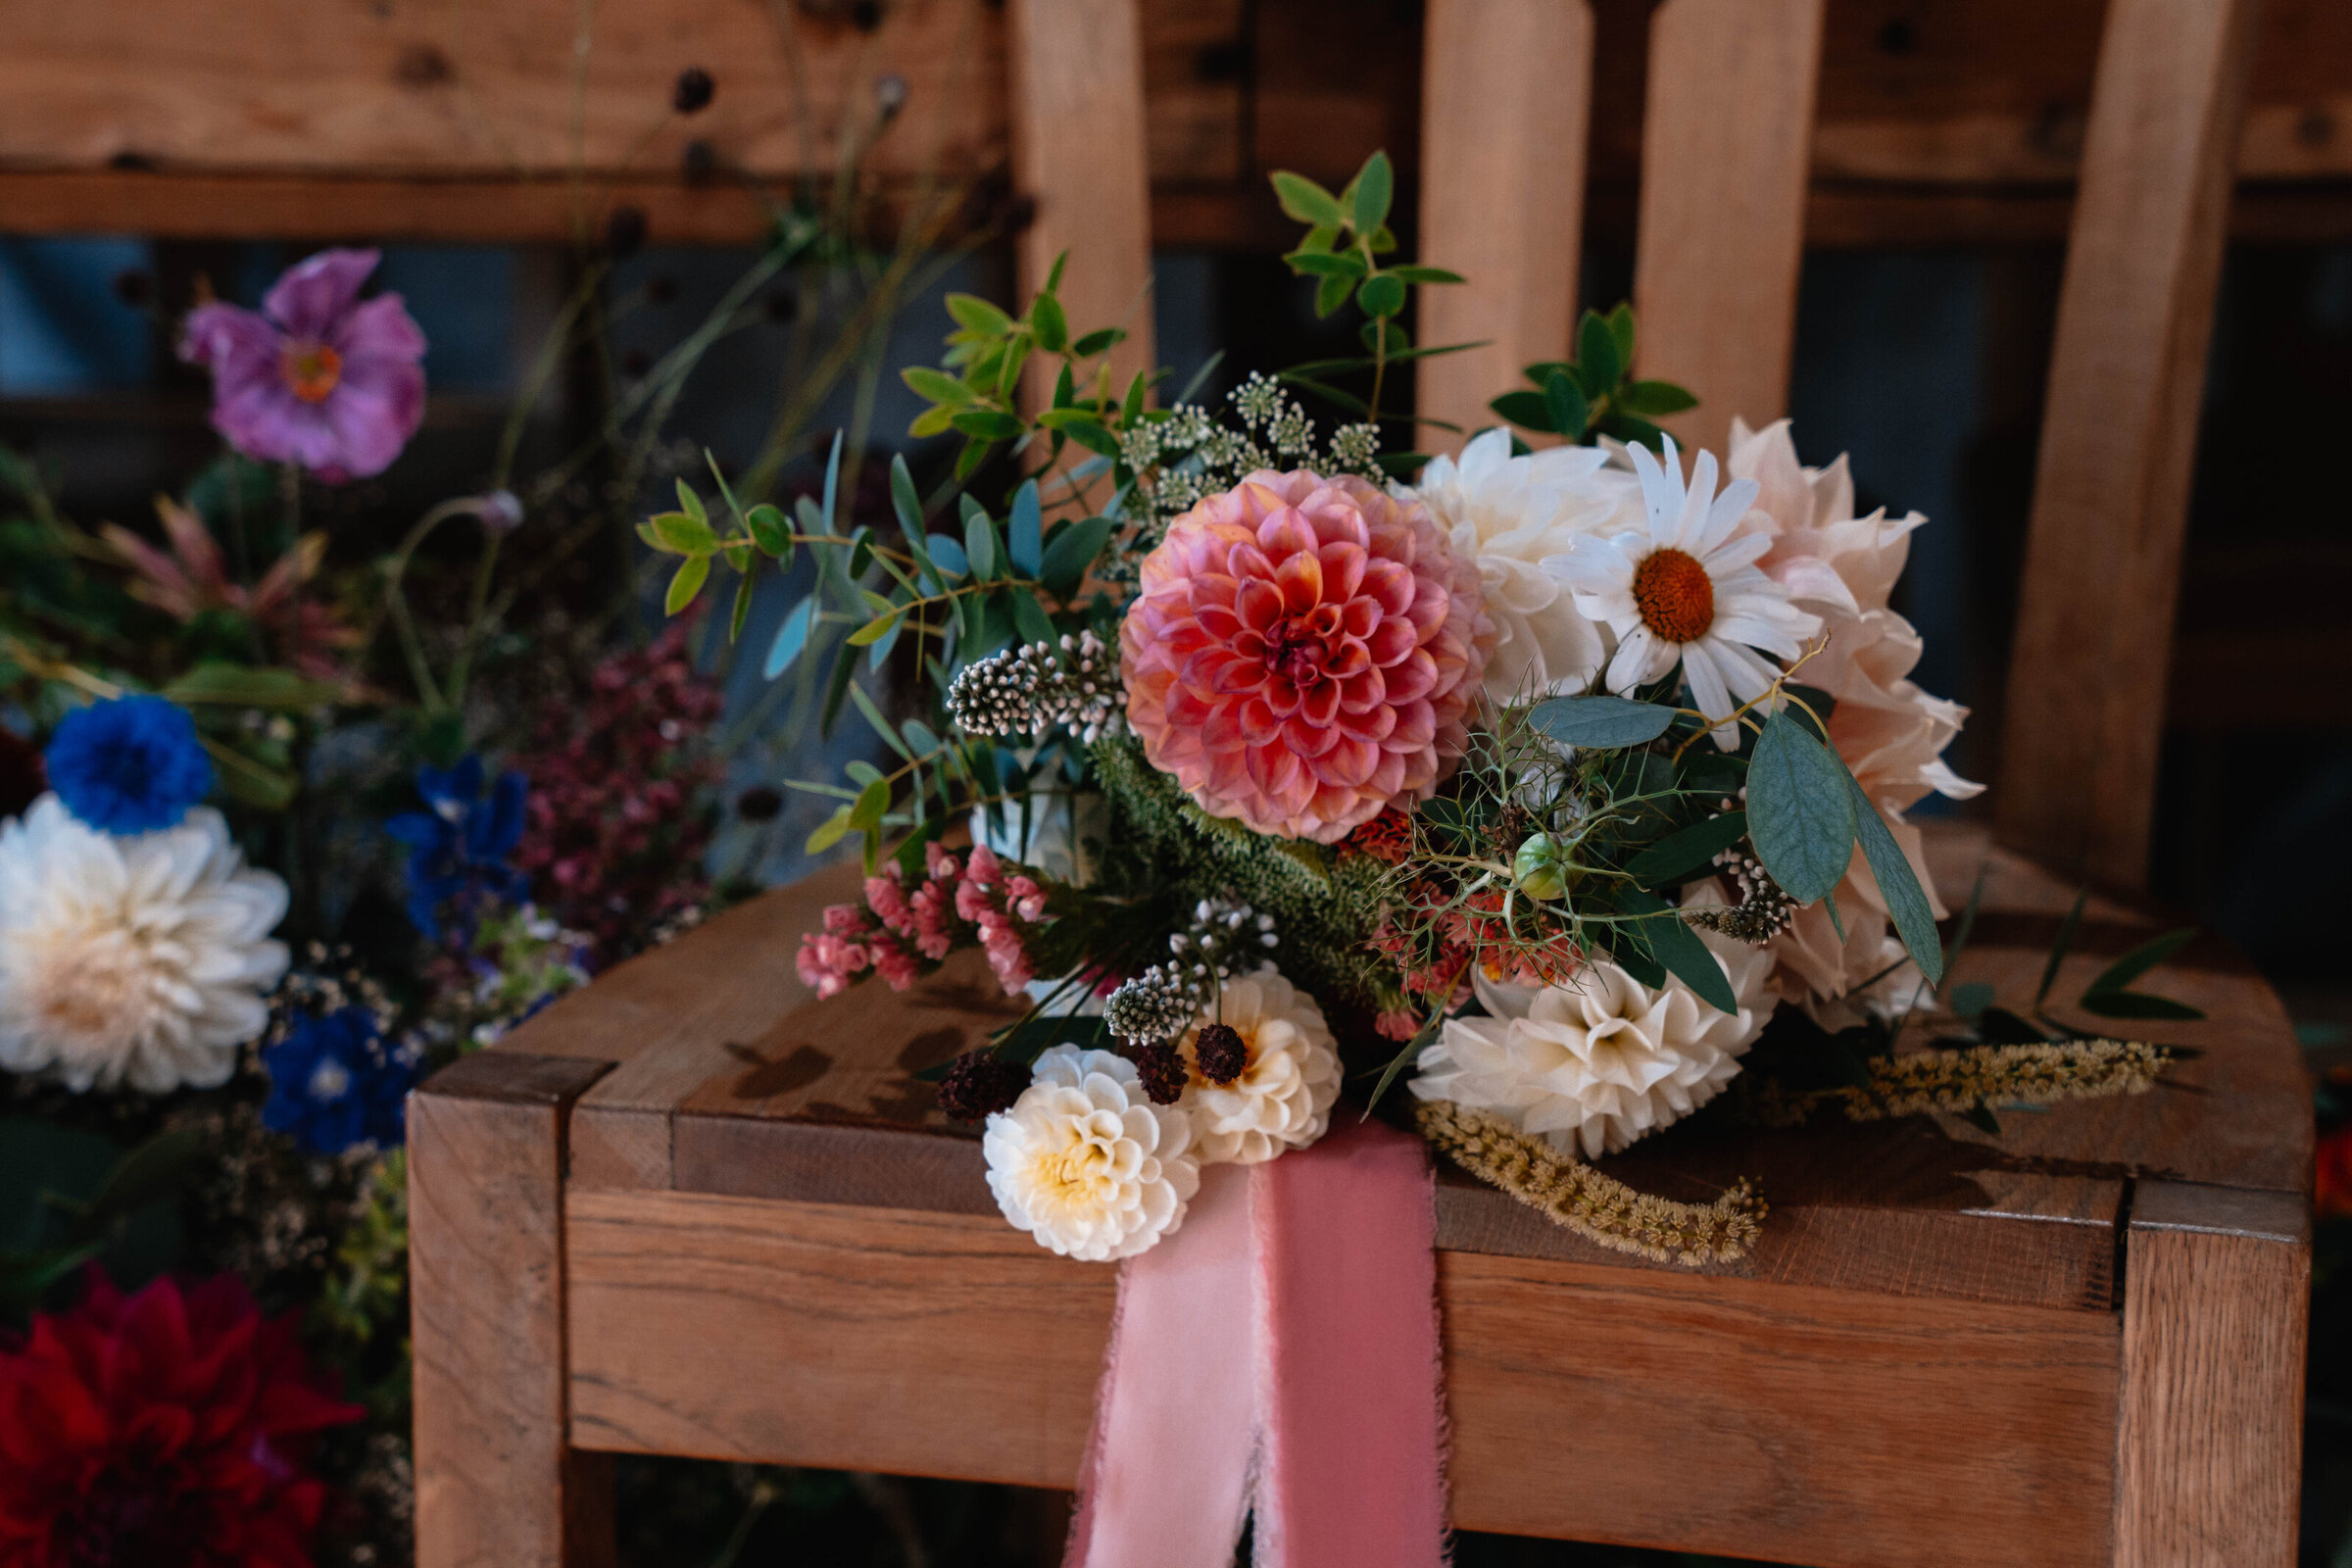 Bridal bouquet of a variety of flowers placed on a wooden chair